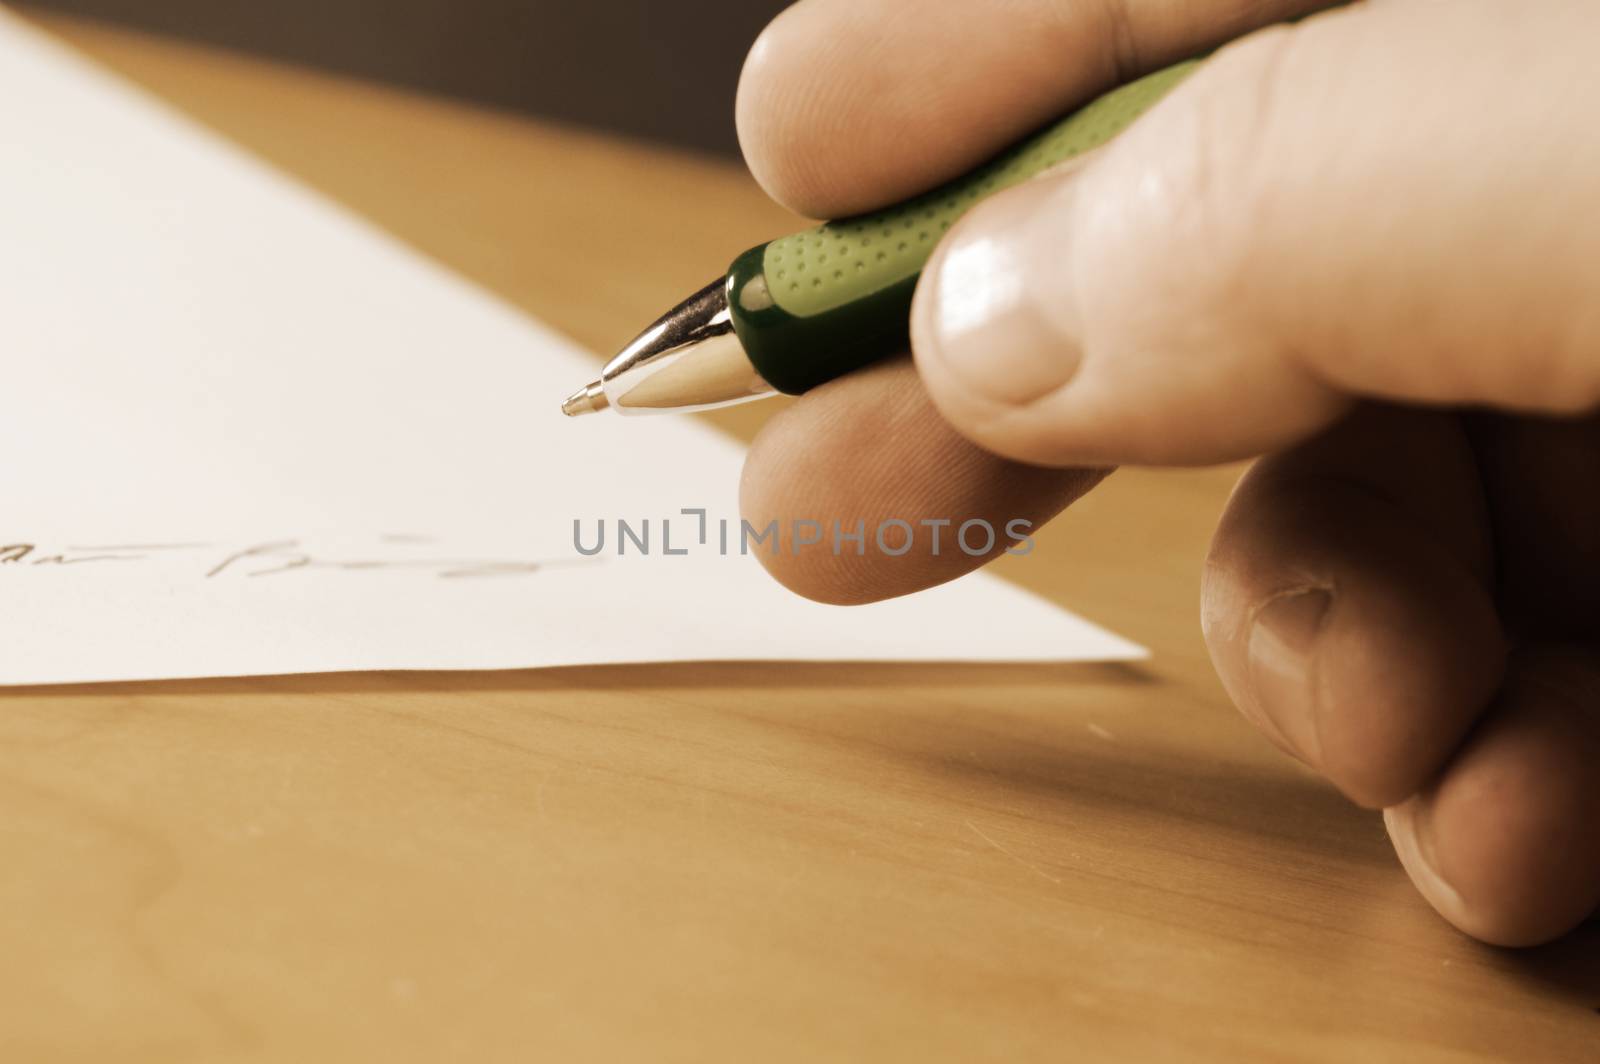 A vintage filter over an image of an important document is being signed by the appropriate person with a closeup of their hand and focus on the tip of the ball point pen.